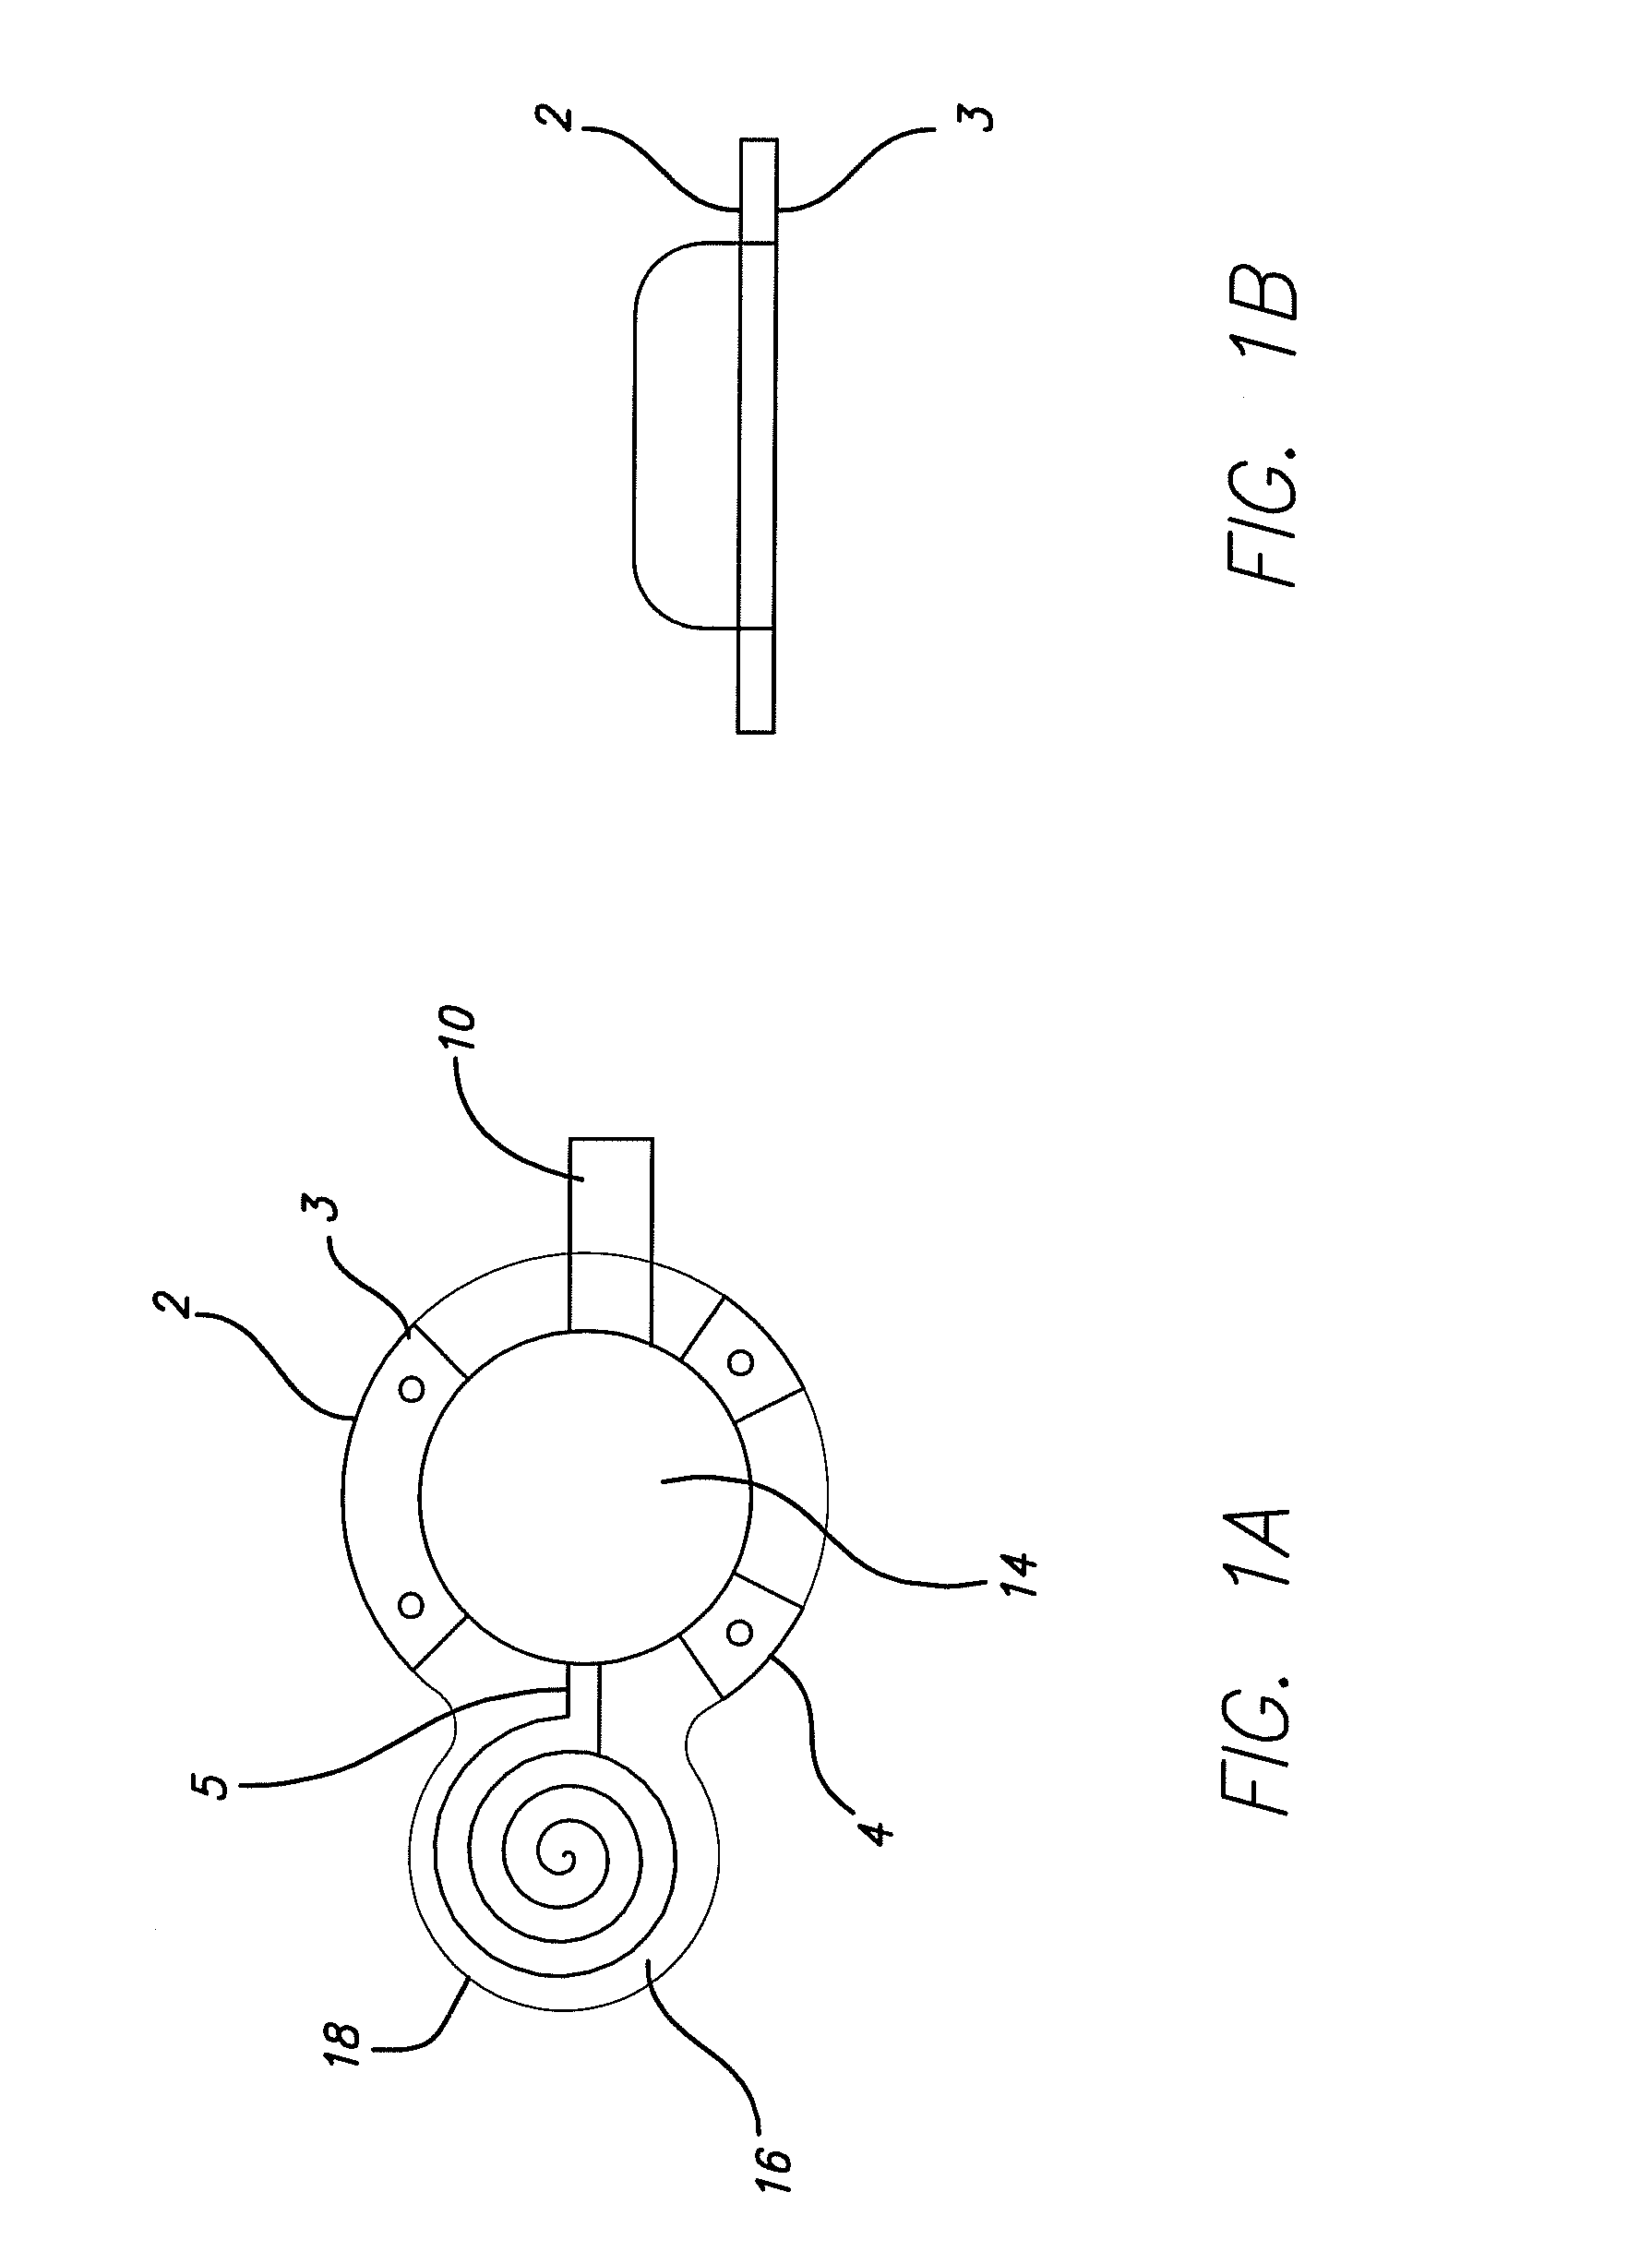 Cortical Interface for Motor Signal Recording and Sensory Signal Stimulation